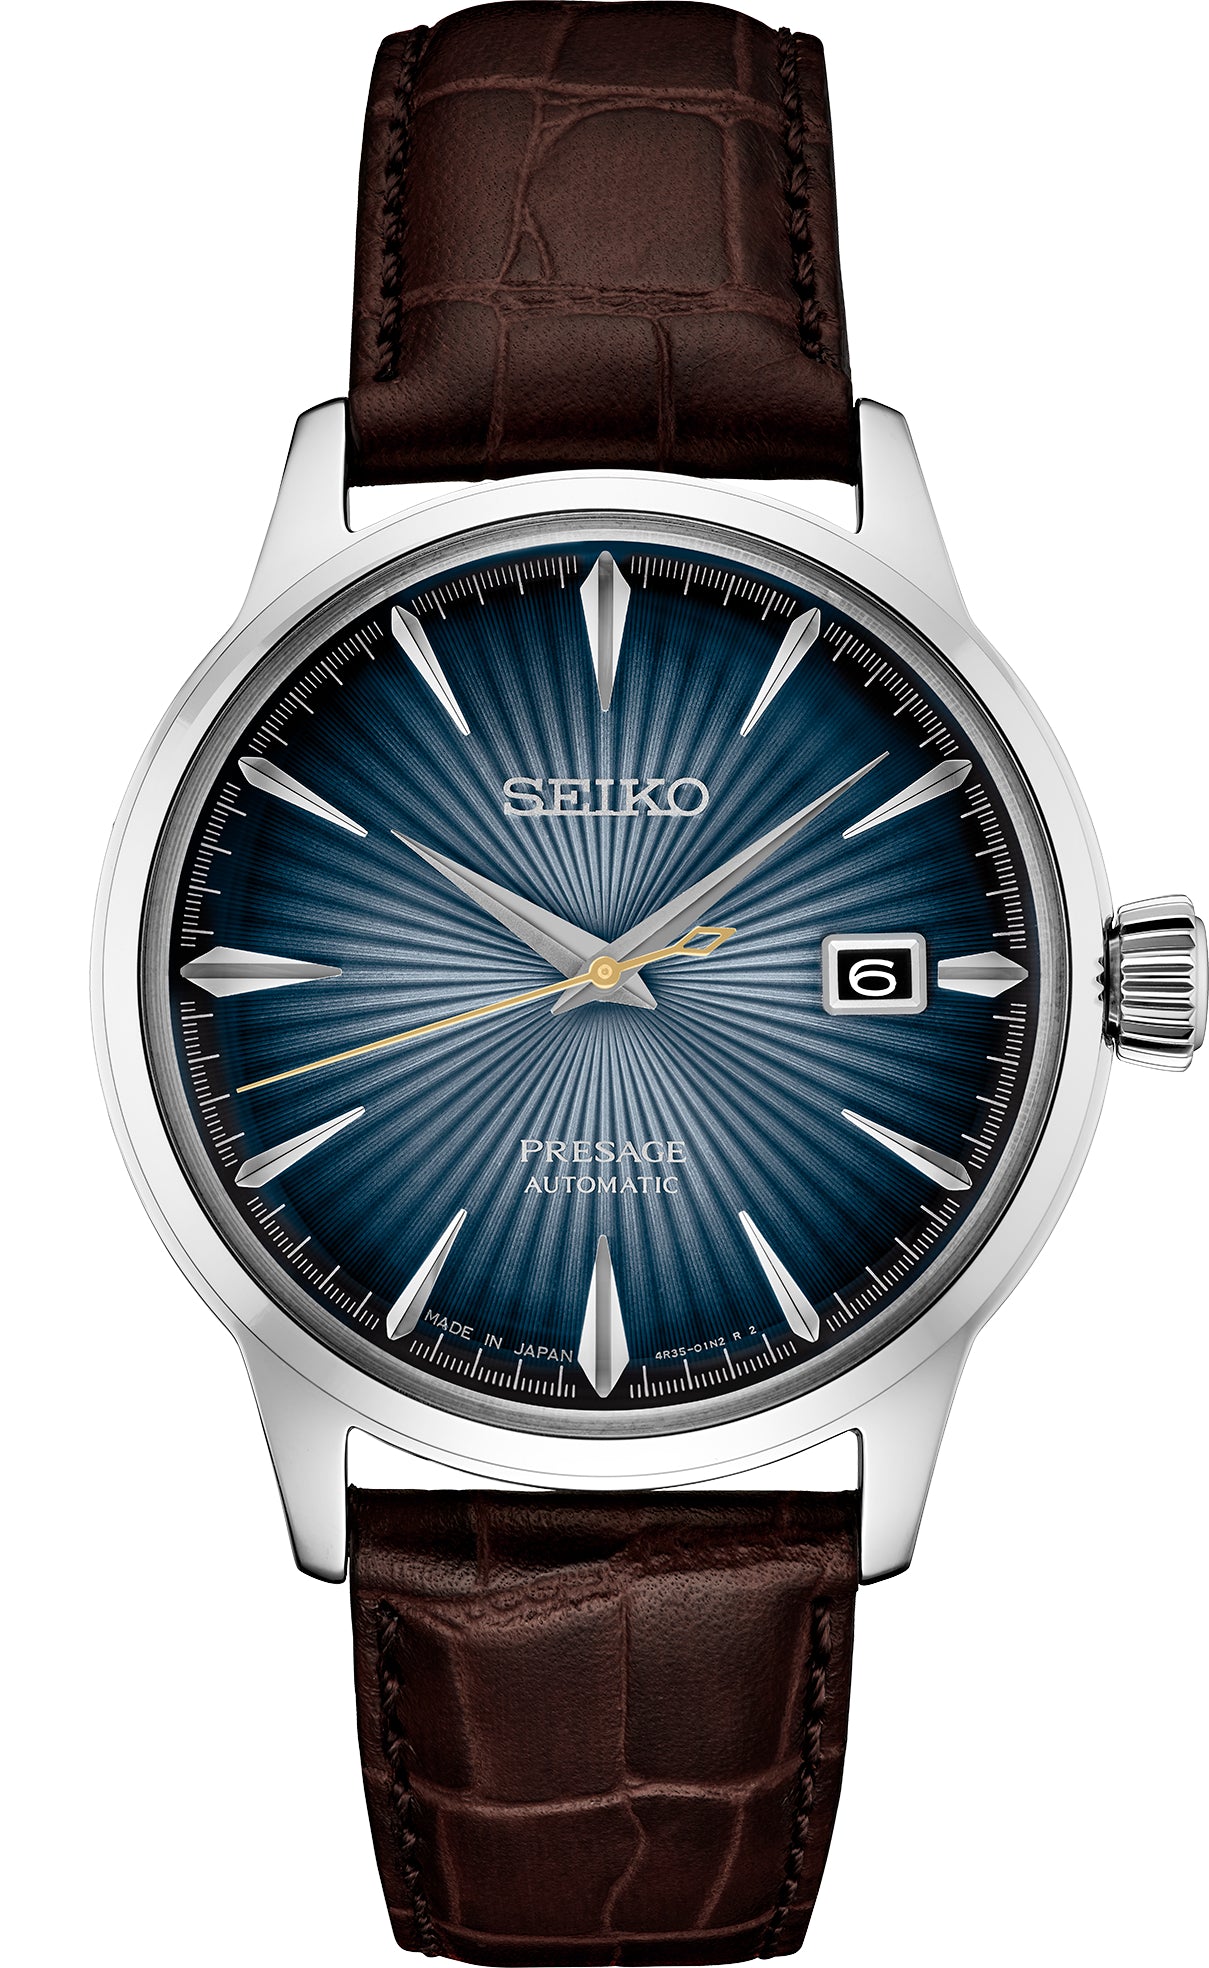 Gents Seiko Presage Cocktail Time SS Automatic Watch